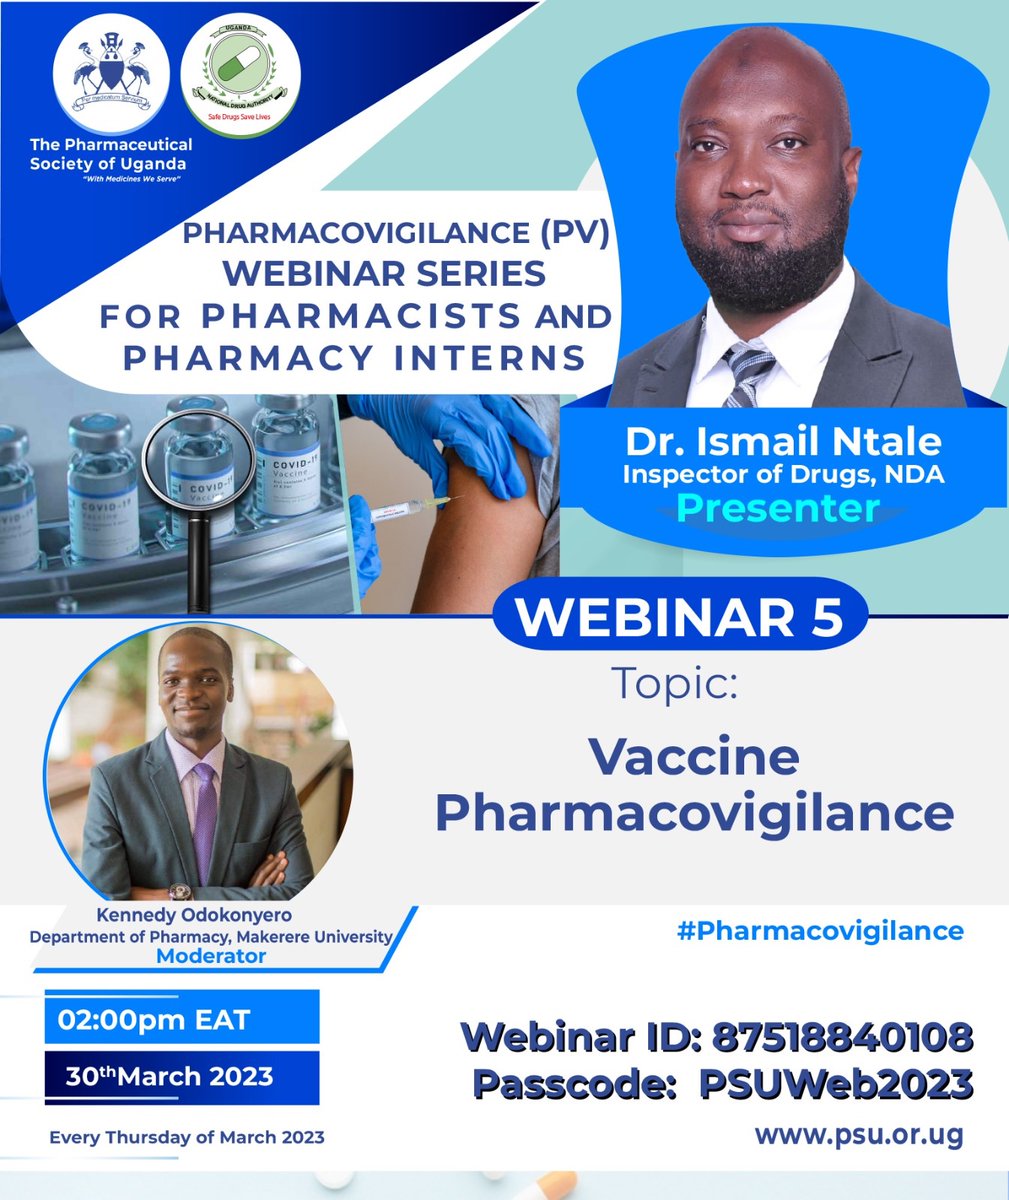 For the fifth and final part of our webinar series on PV for Pharmacists and Pharmacy Interns, we shall discuss Vaccine Pharmacovigilance. Register ➡️ us06web.zoom.us/webinar/regist…